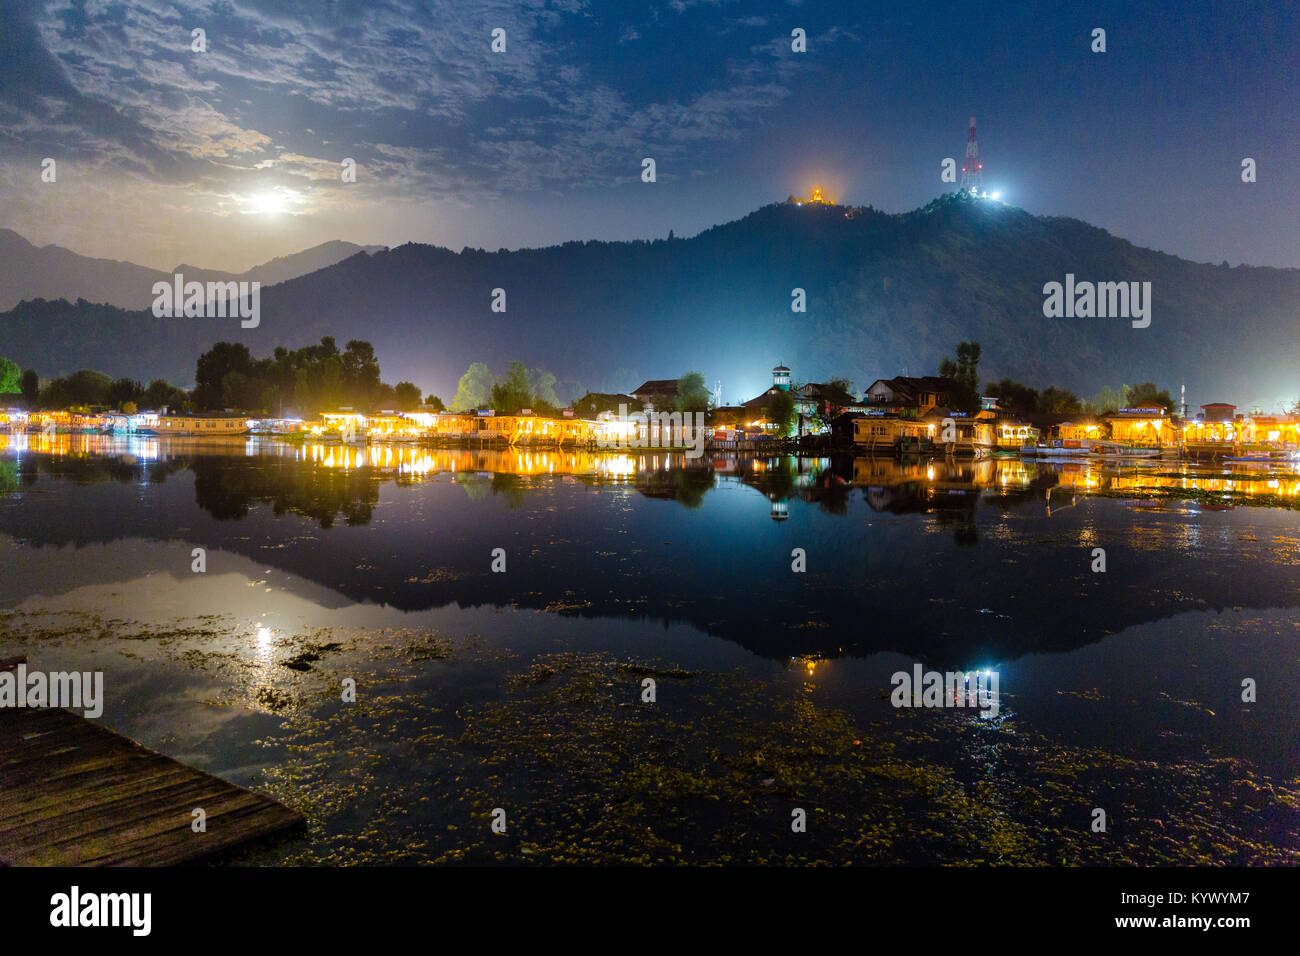 Dal lake (Golden lake) at Srinagar, India as seen on a full moon night with house boats lit up. Shankaracharya temple seen on top of the hills. Beauti Stock Photo